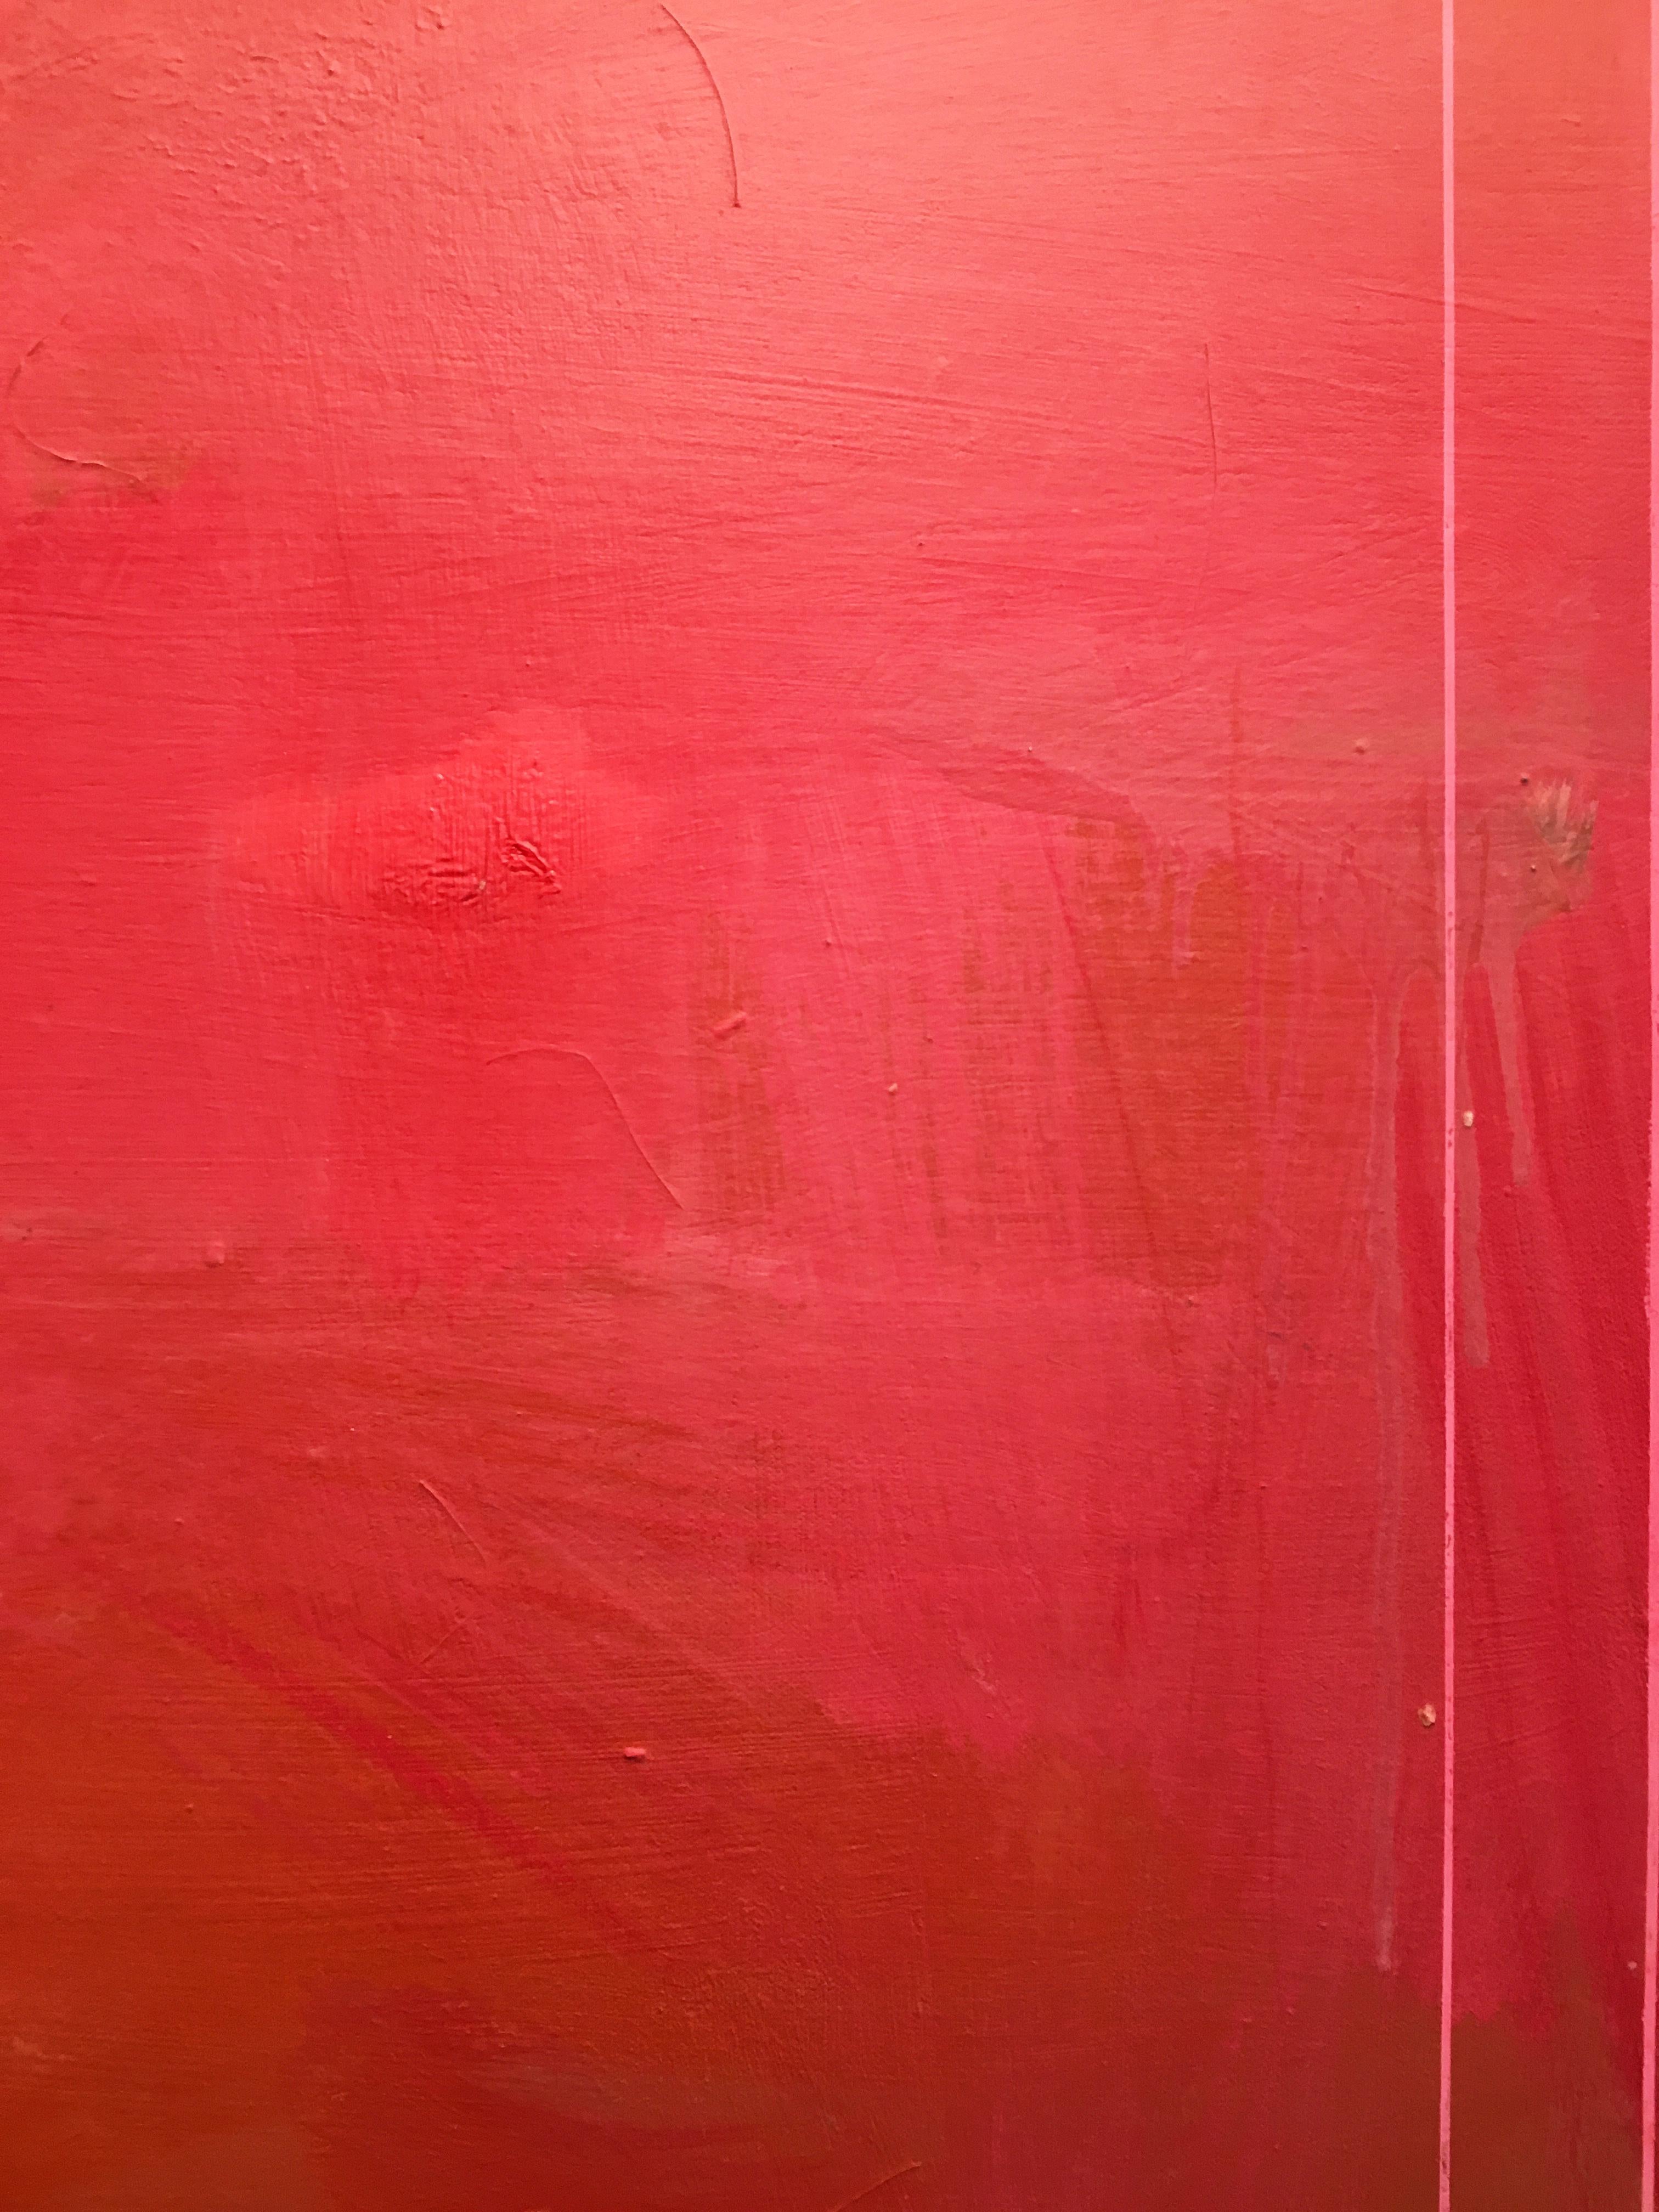 'Je T'aime 8' by Linda Touby, 2018. Oil on canvas, 48 x 48 inches. This painting features textural, cumulative layers of brushstrokes on a flat field of color. The floating zones of luminous pigments are in colors of red, pink, and yellow.  The